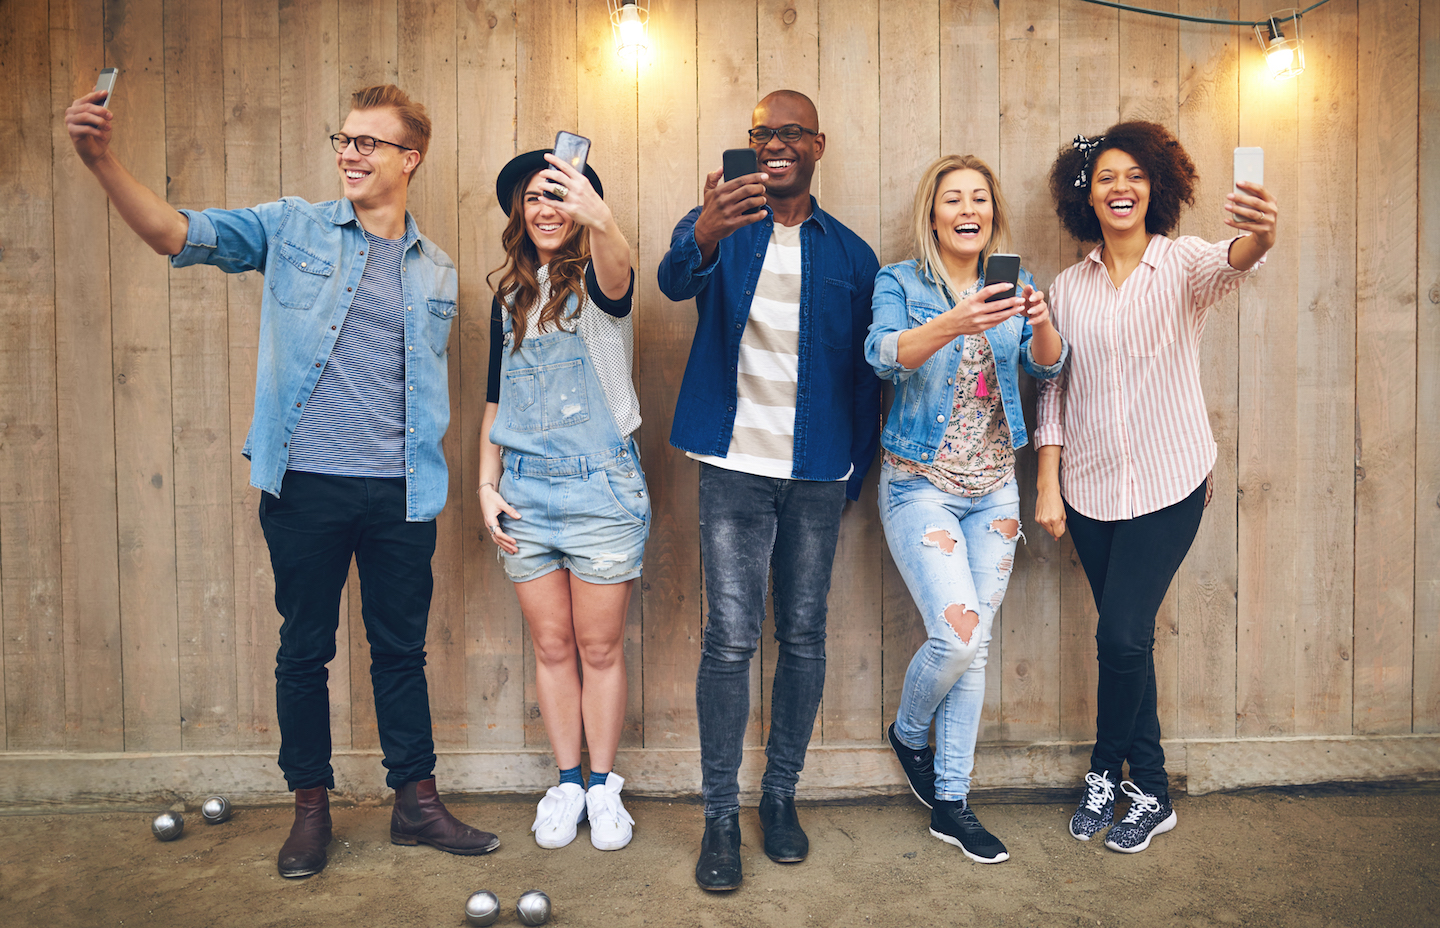 Targeting millennials: How to engage with the millennial generation